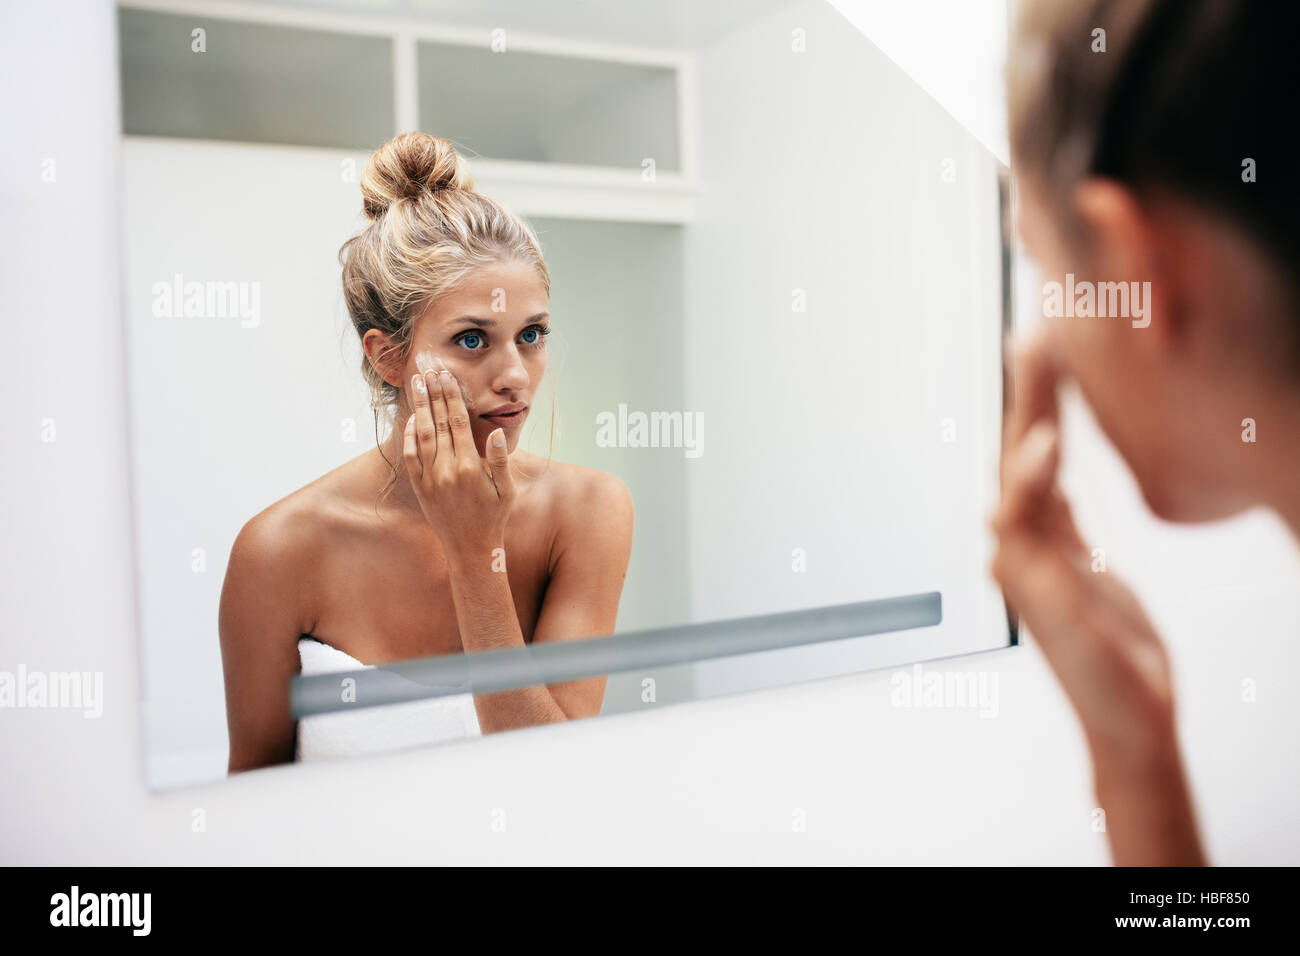 Reflection of a female in mirror rubbing cosmetic cream on her face. Female putting on moisturizer on her facial skin in bathroom. Stock Photo